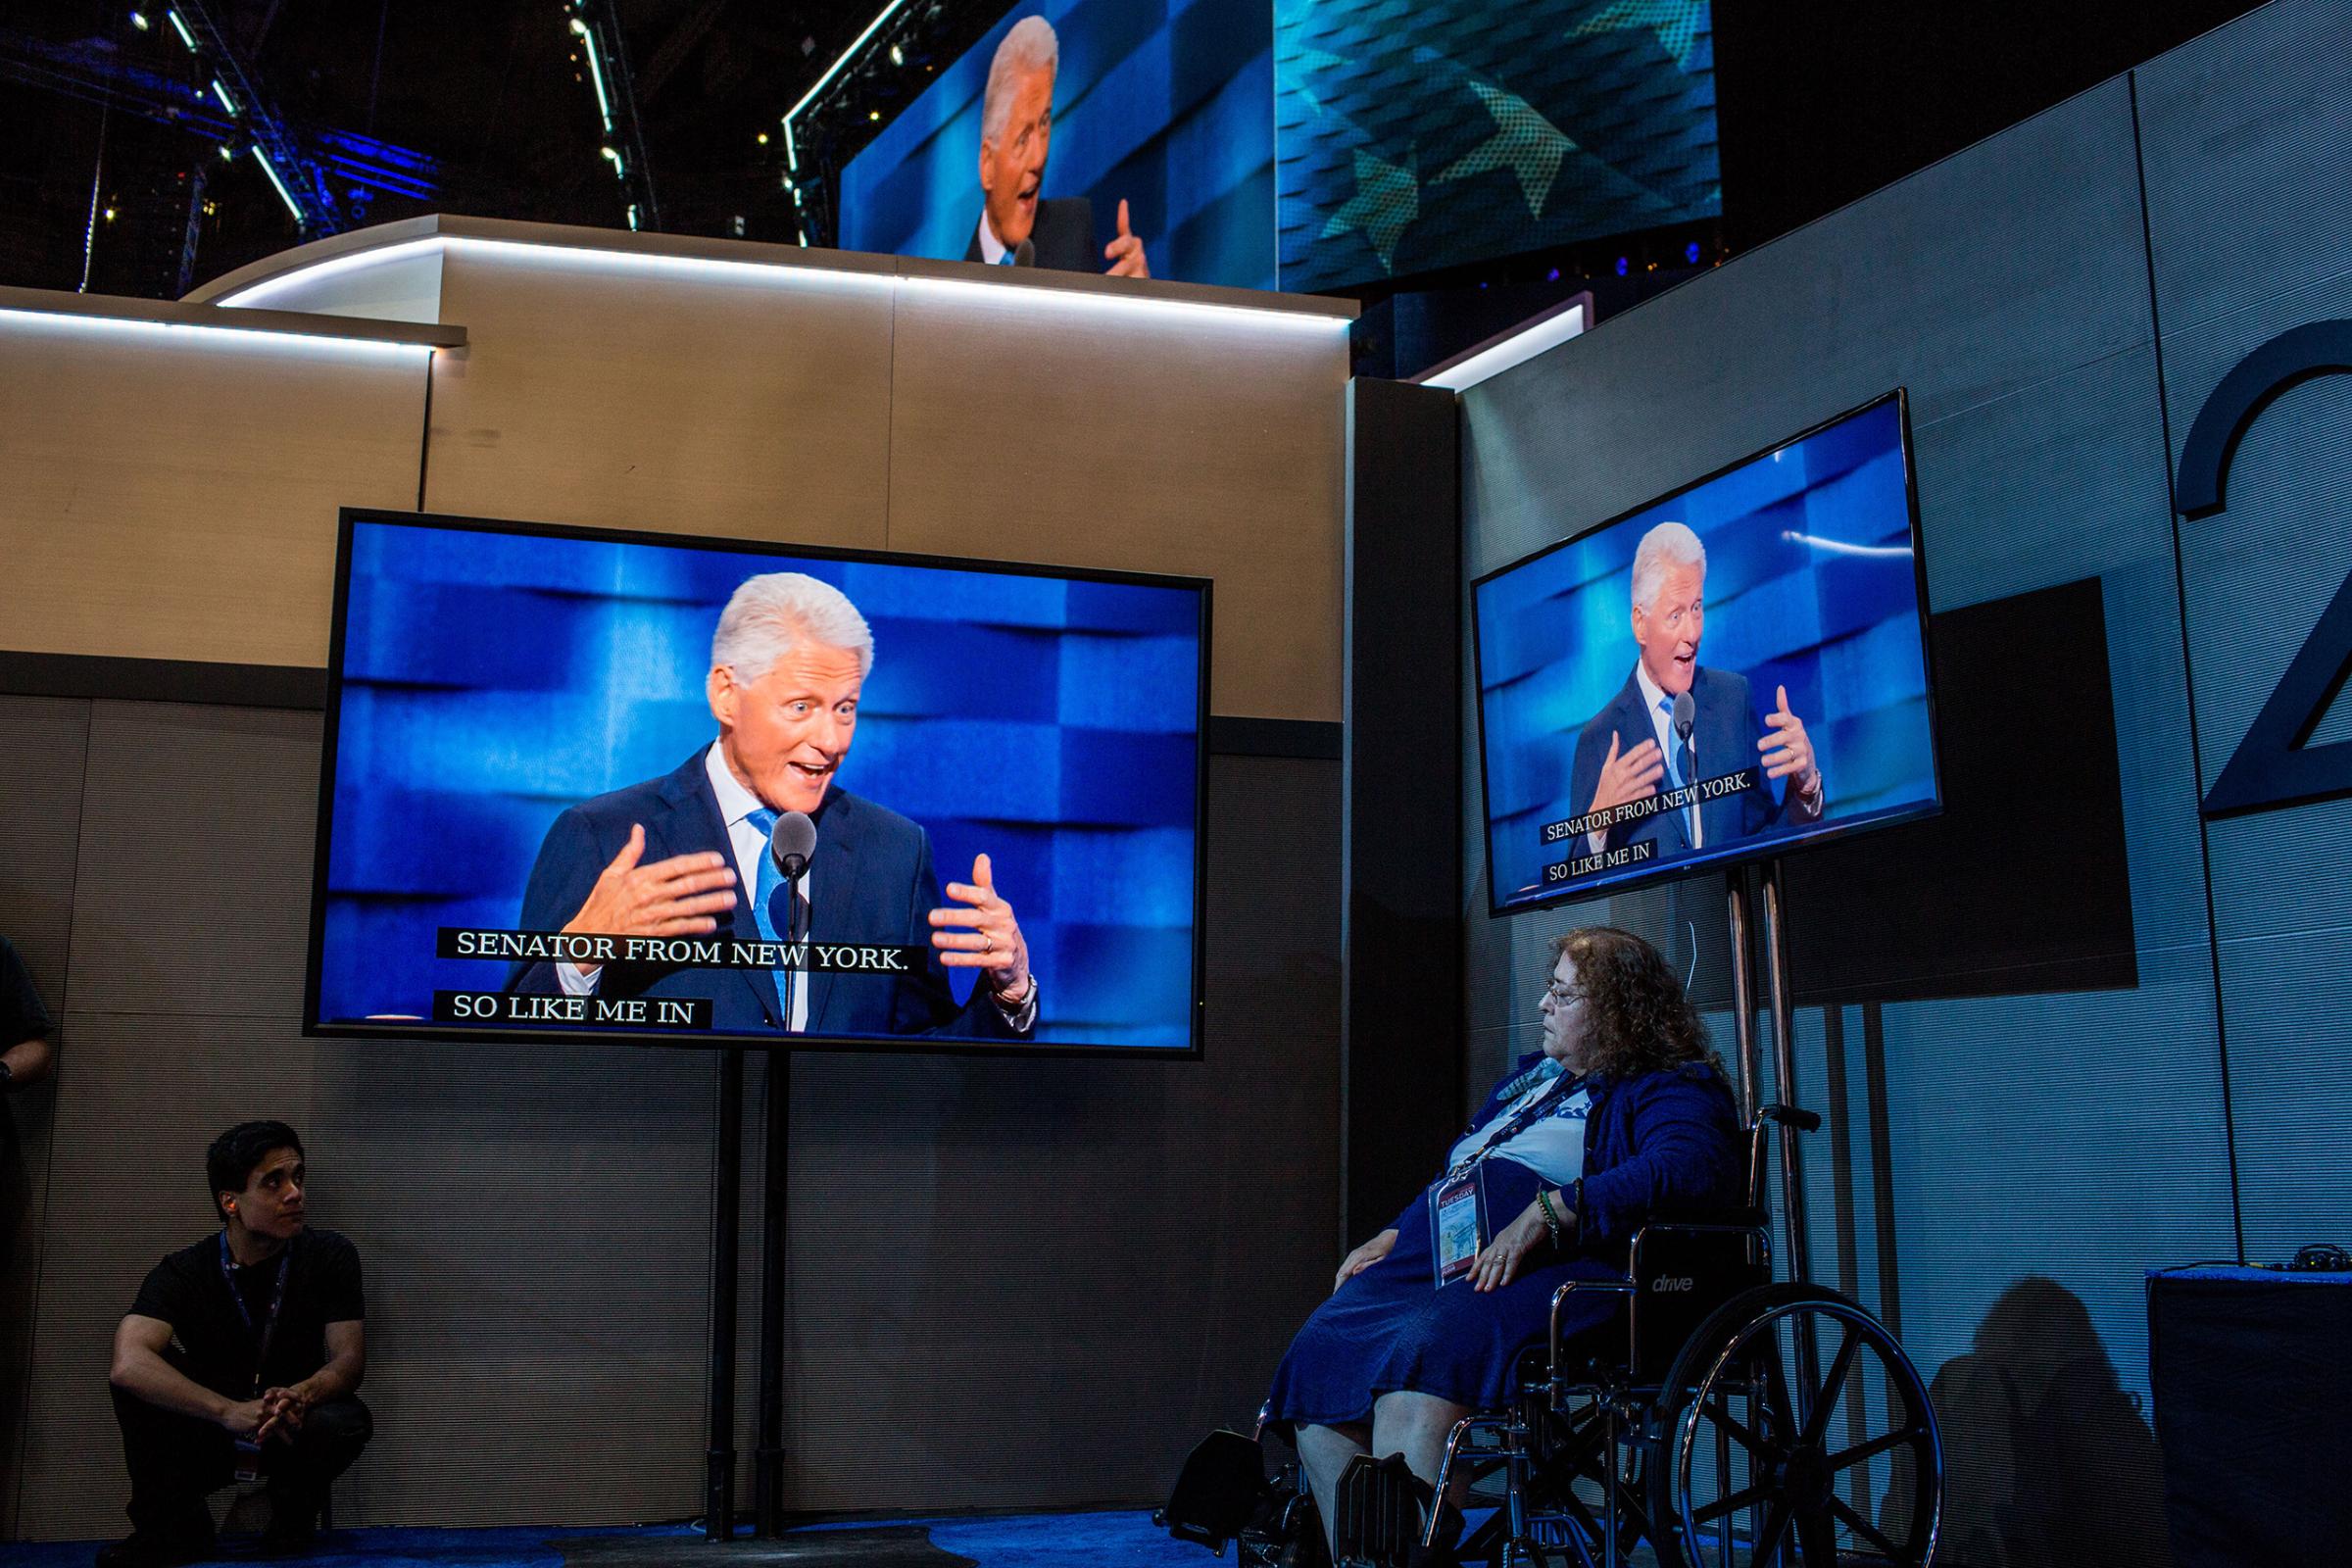 Tuesday night speakers and performers included Bill Clinton, Alicia Keyes, and Meryl Streetp at the Democratic National Convention at the Wells Fargo Center on July 26, 2016 in Philadelphia.(Natalie Keyssar for TIME)